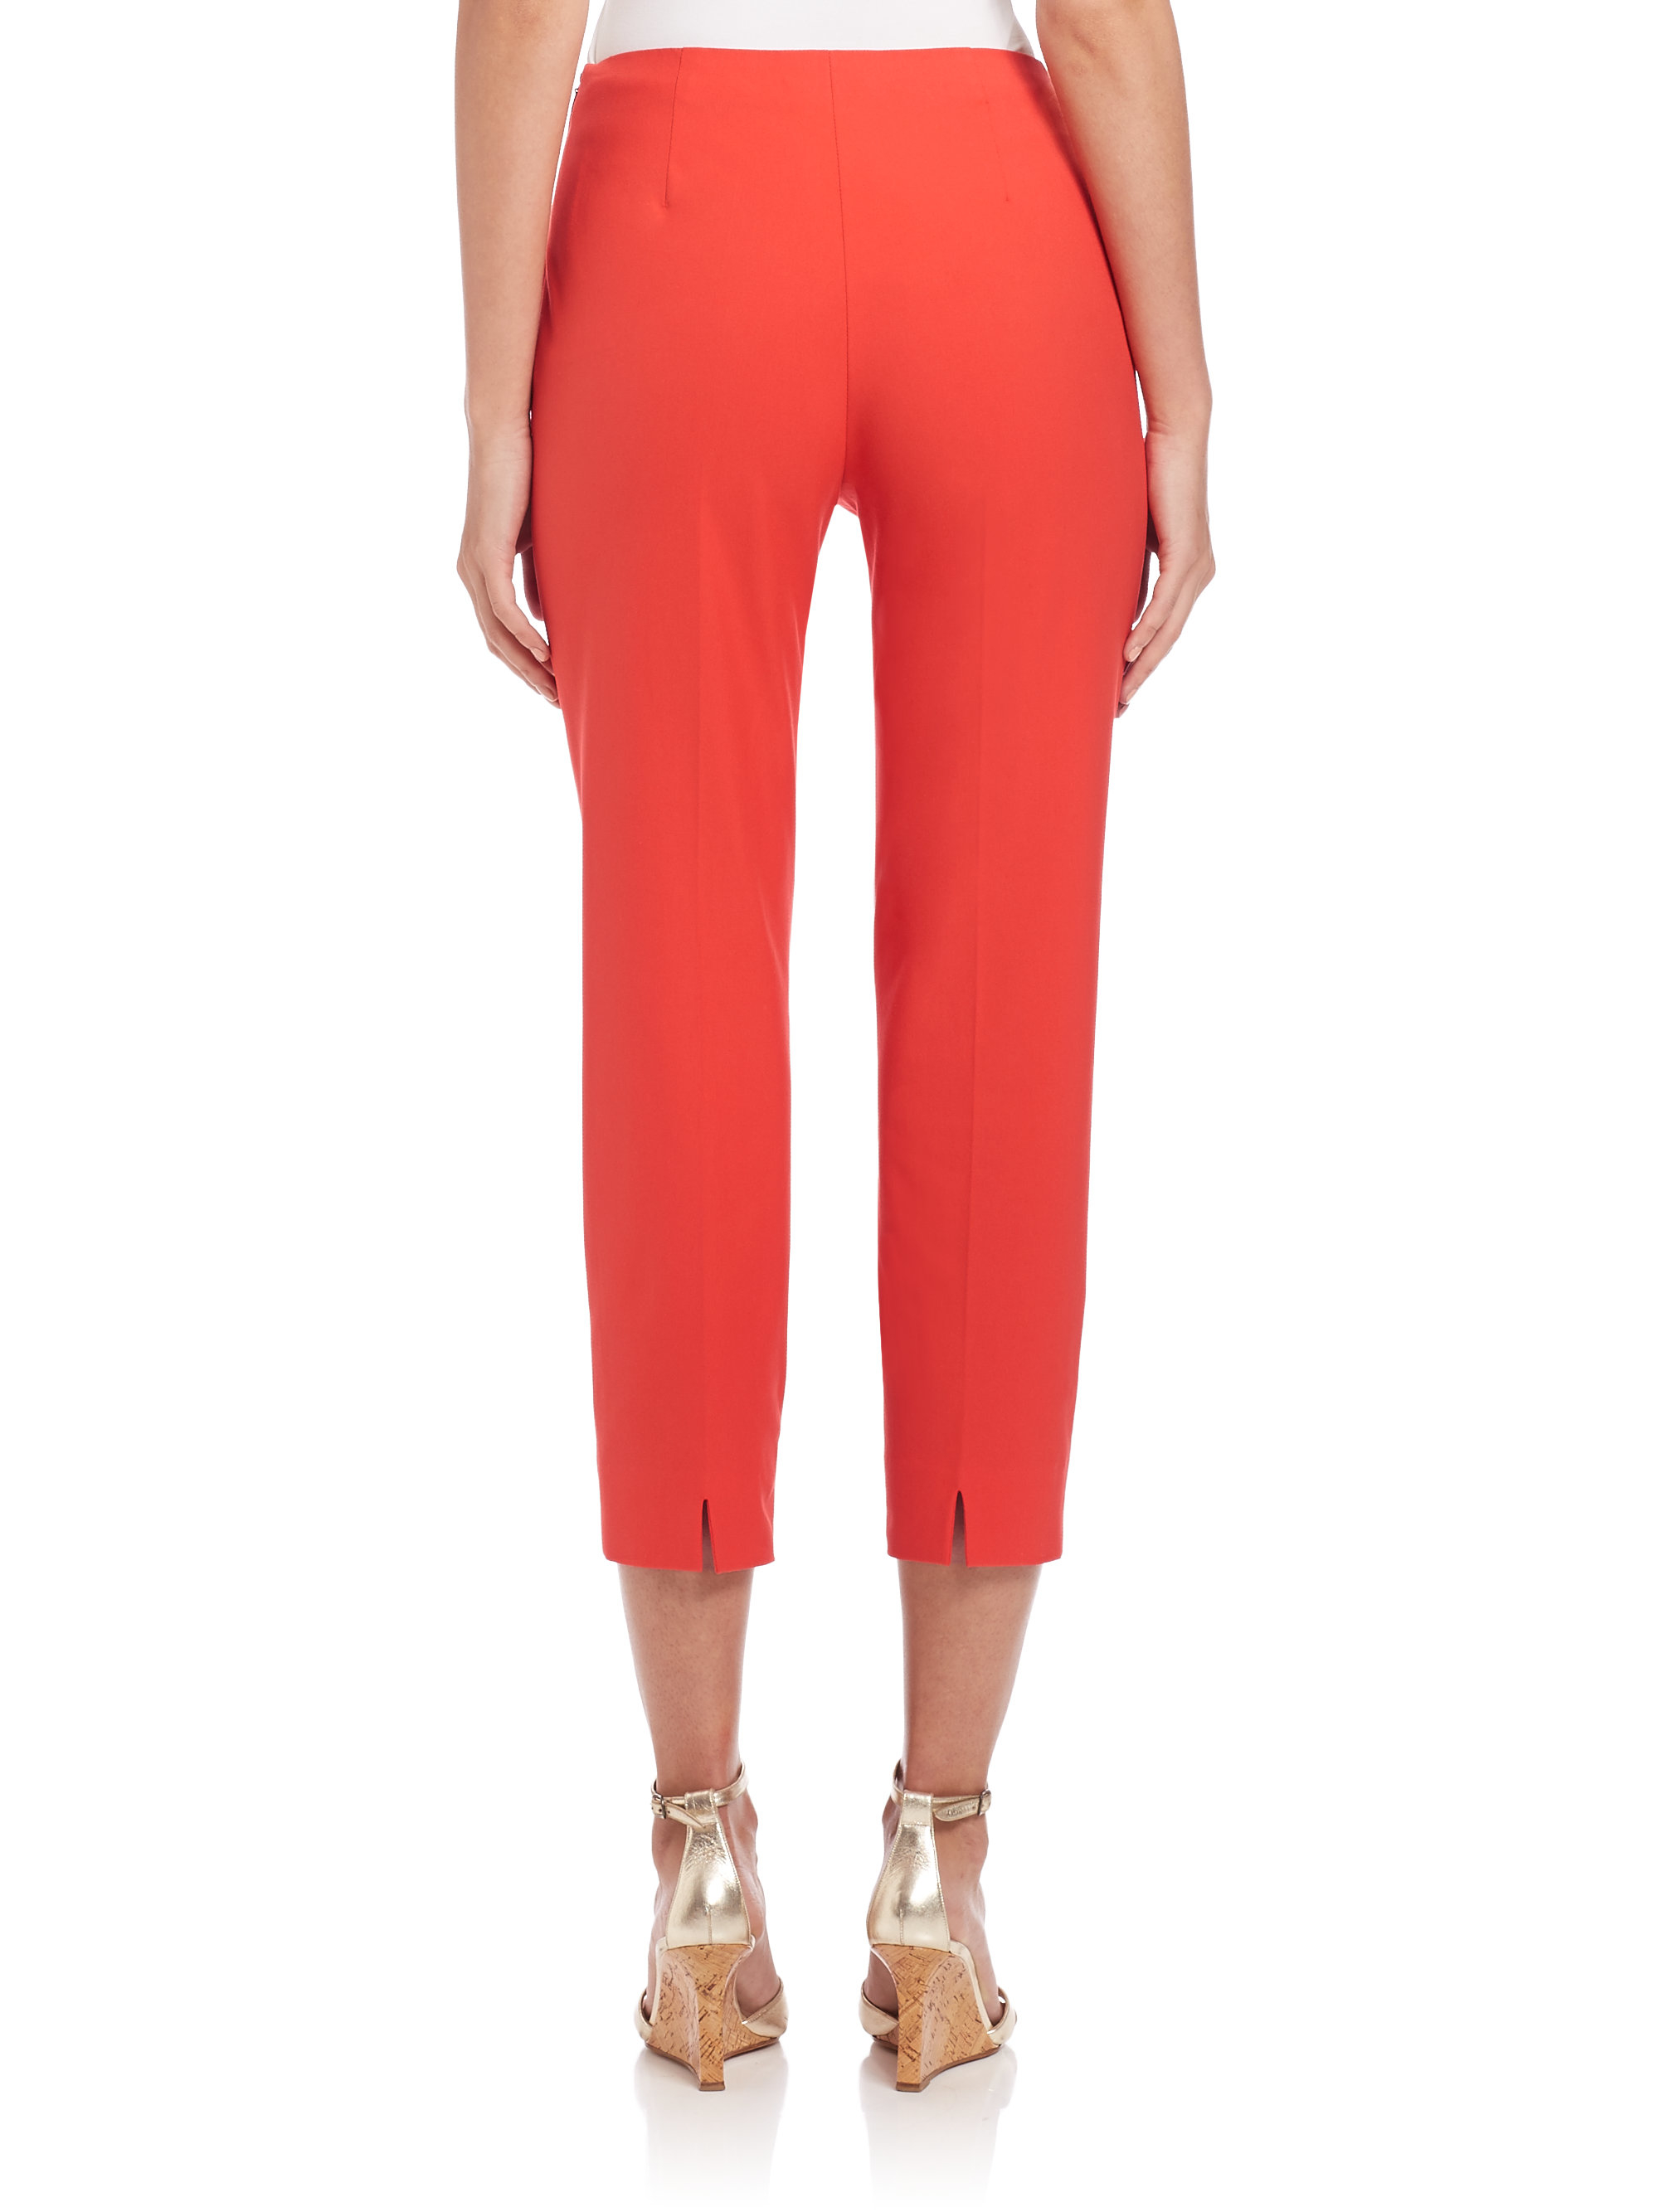 Piazza Sempione Cotton Audrey Pants in Red - Lyst